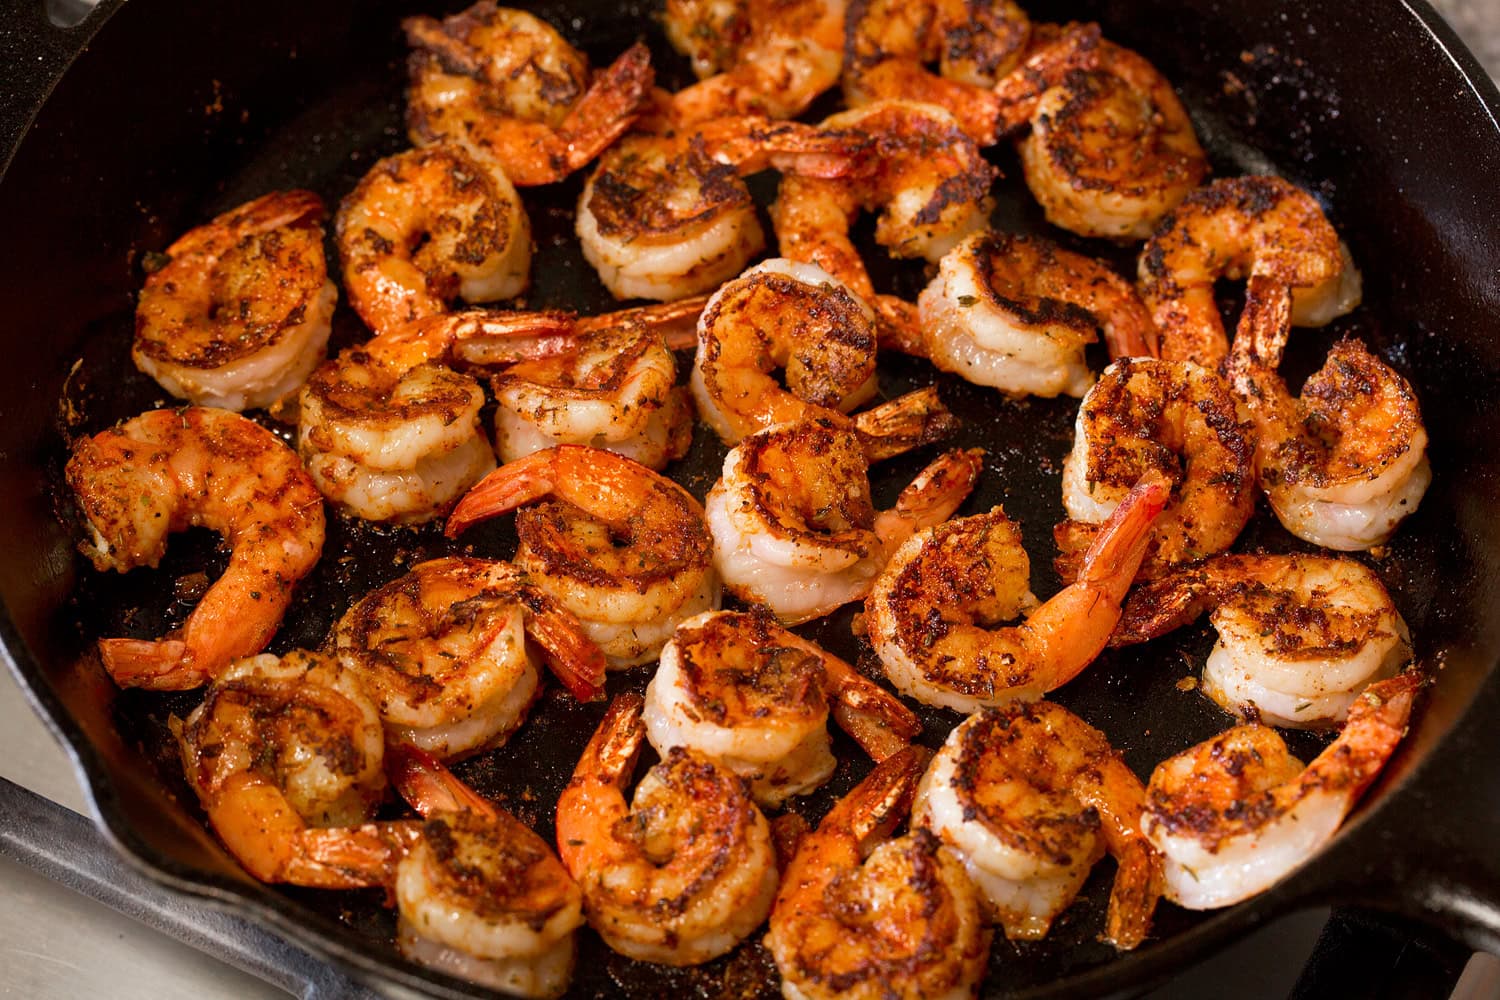 Blackened shrimp shown cooked through in a cast iron skillet on second side.